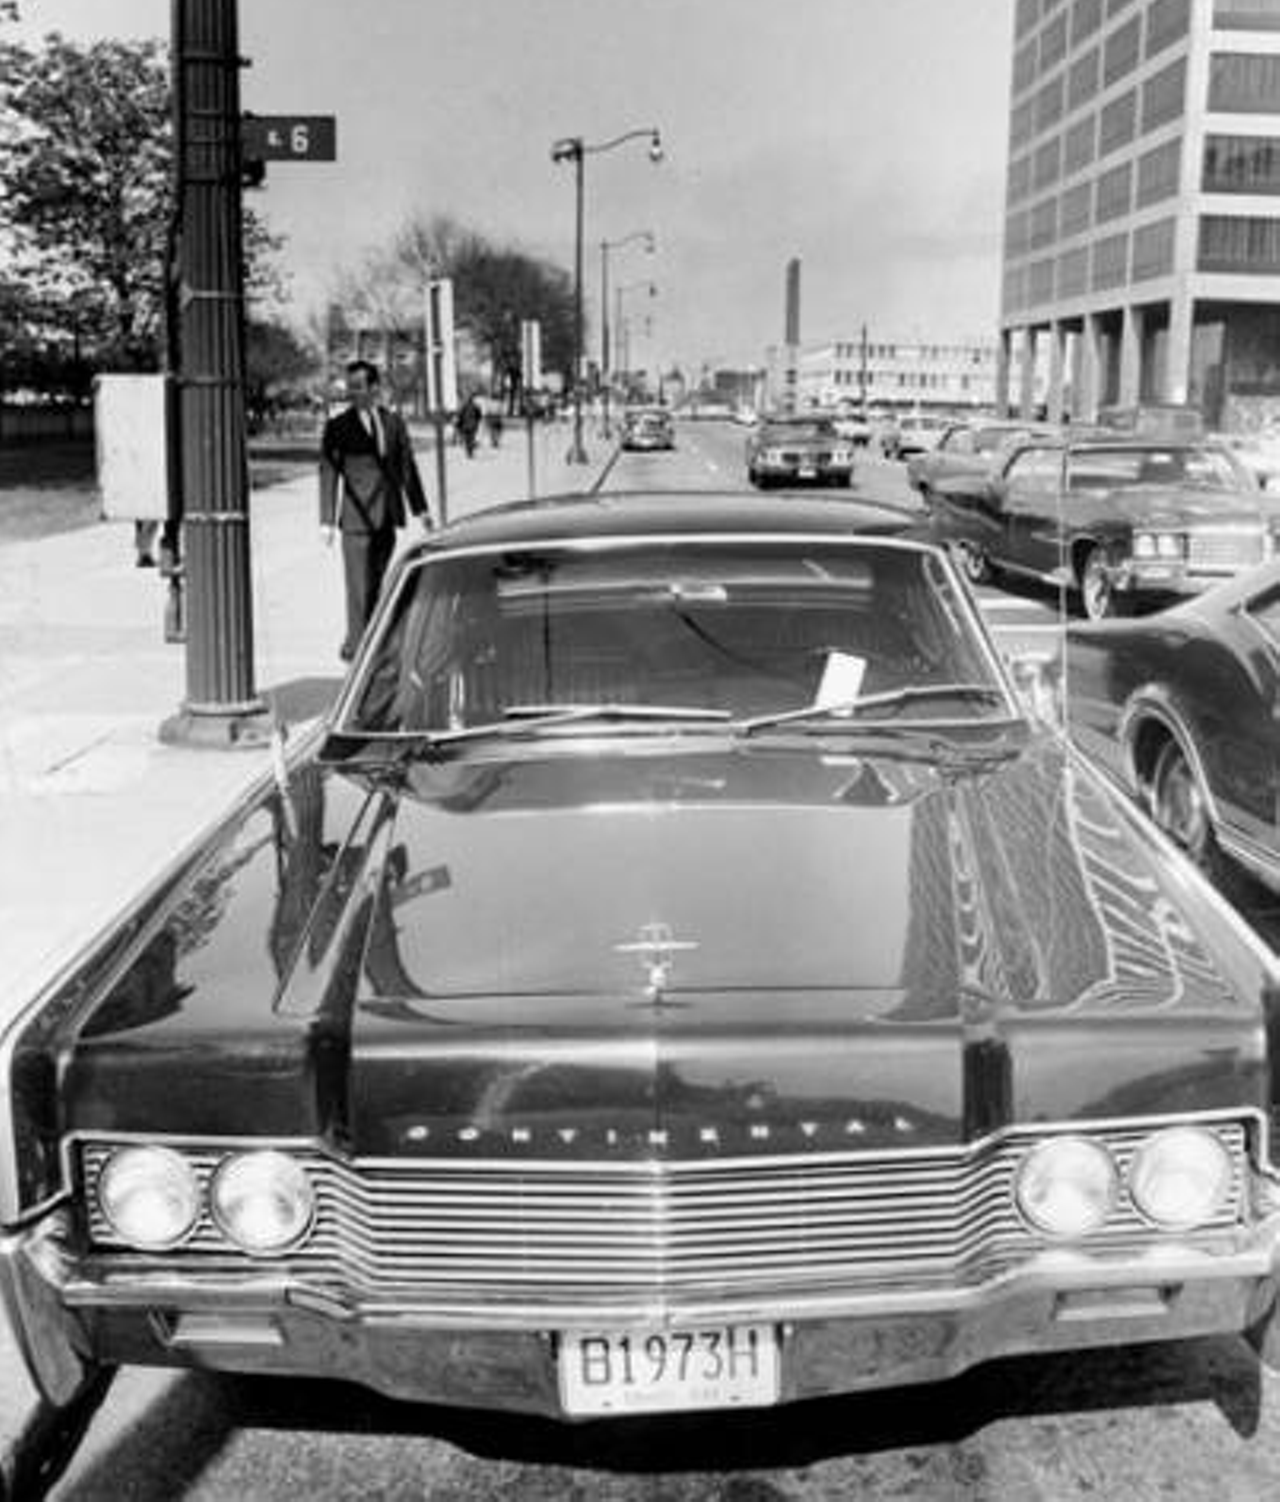 Mayor Carl B. Stokes's limousine is issued a parking ticket, 1968.